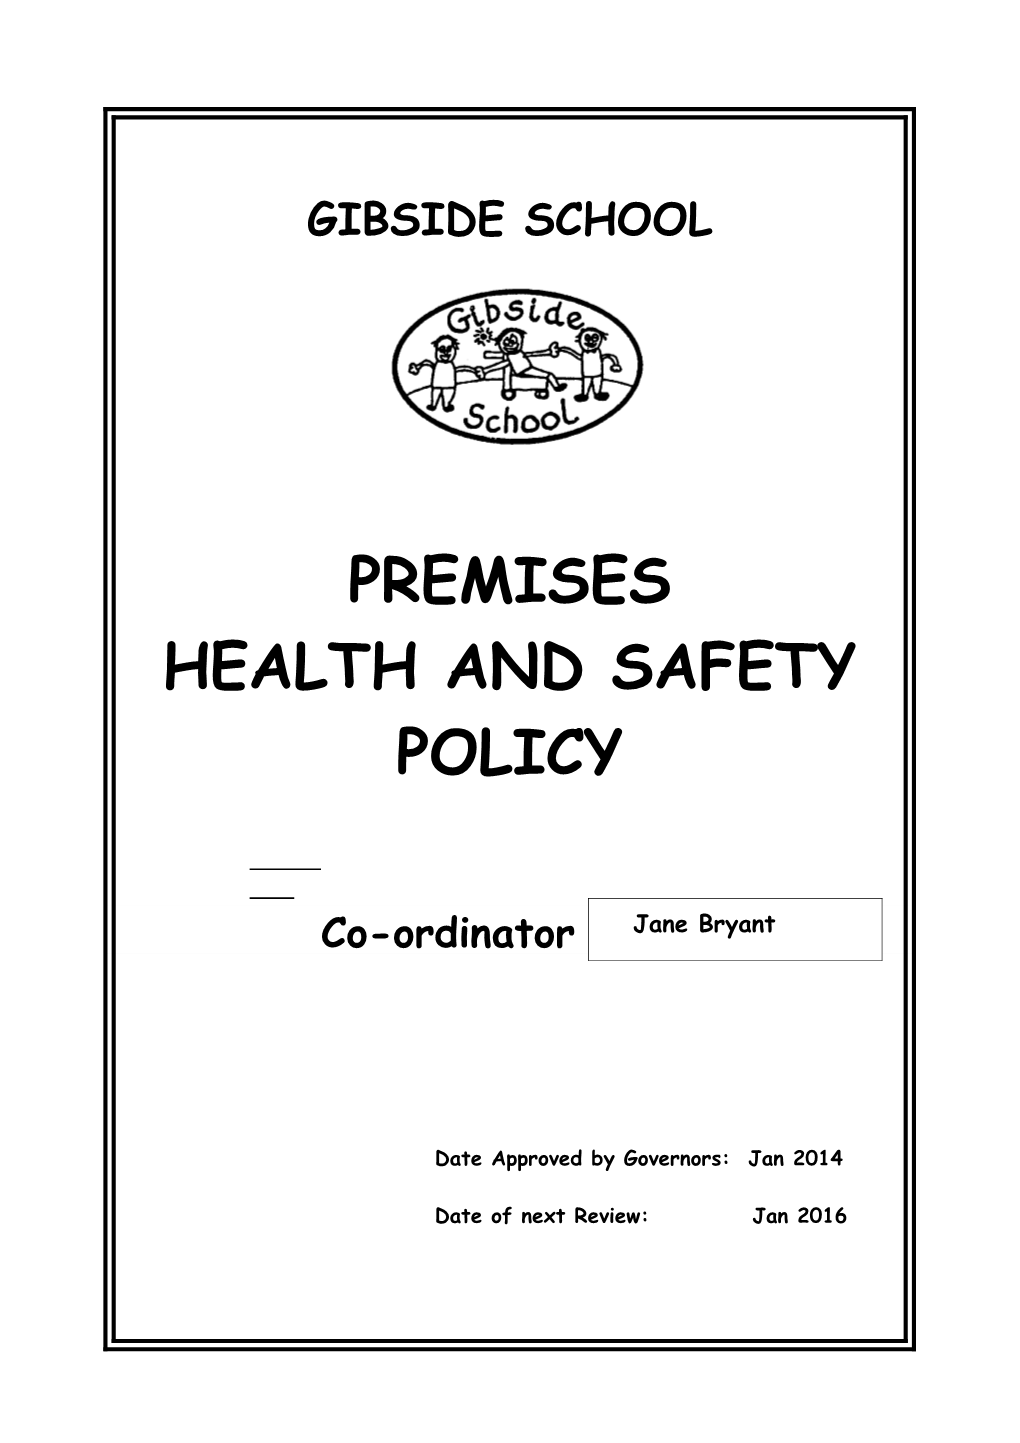 Policy on Health and Safety